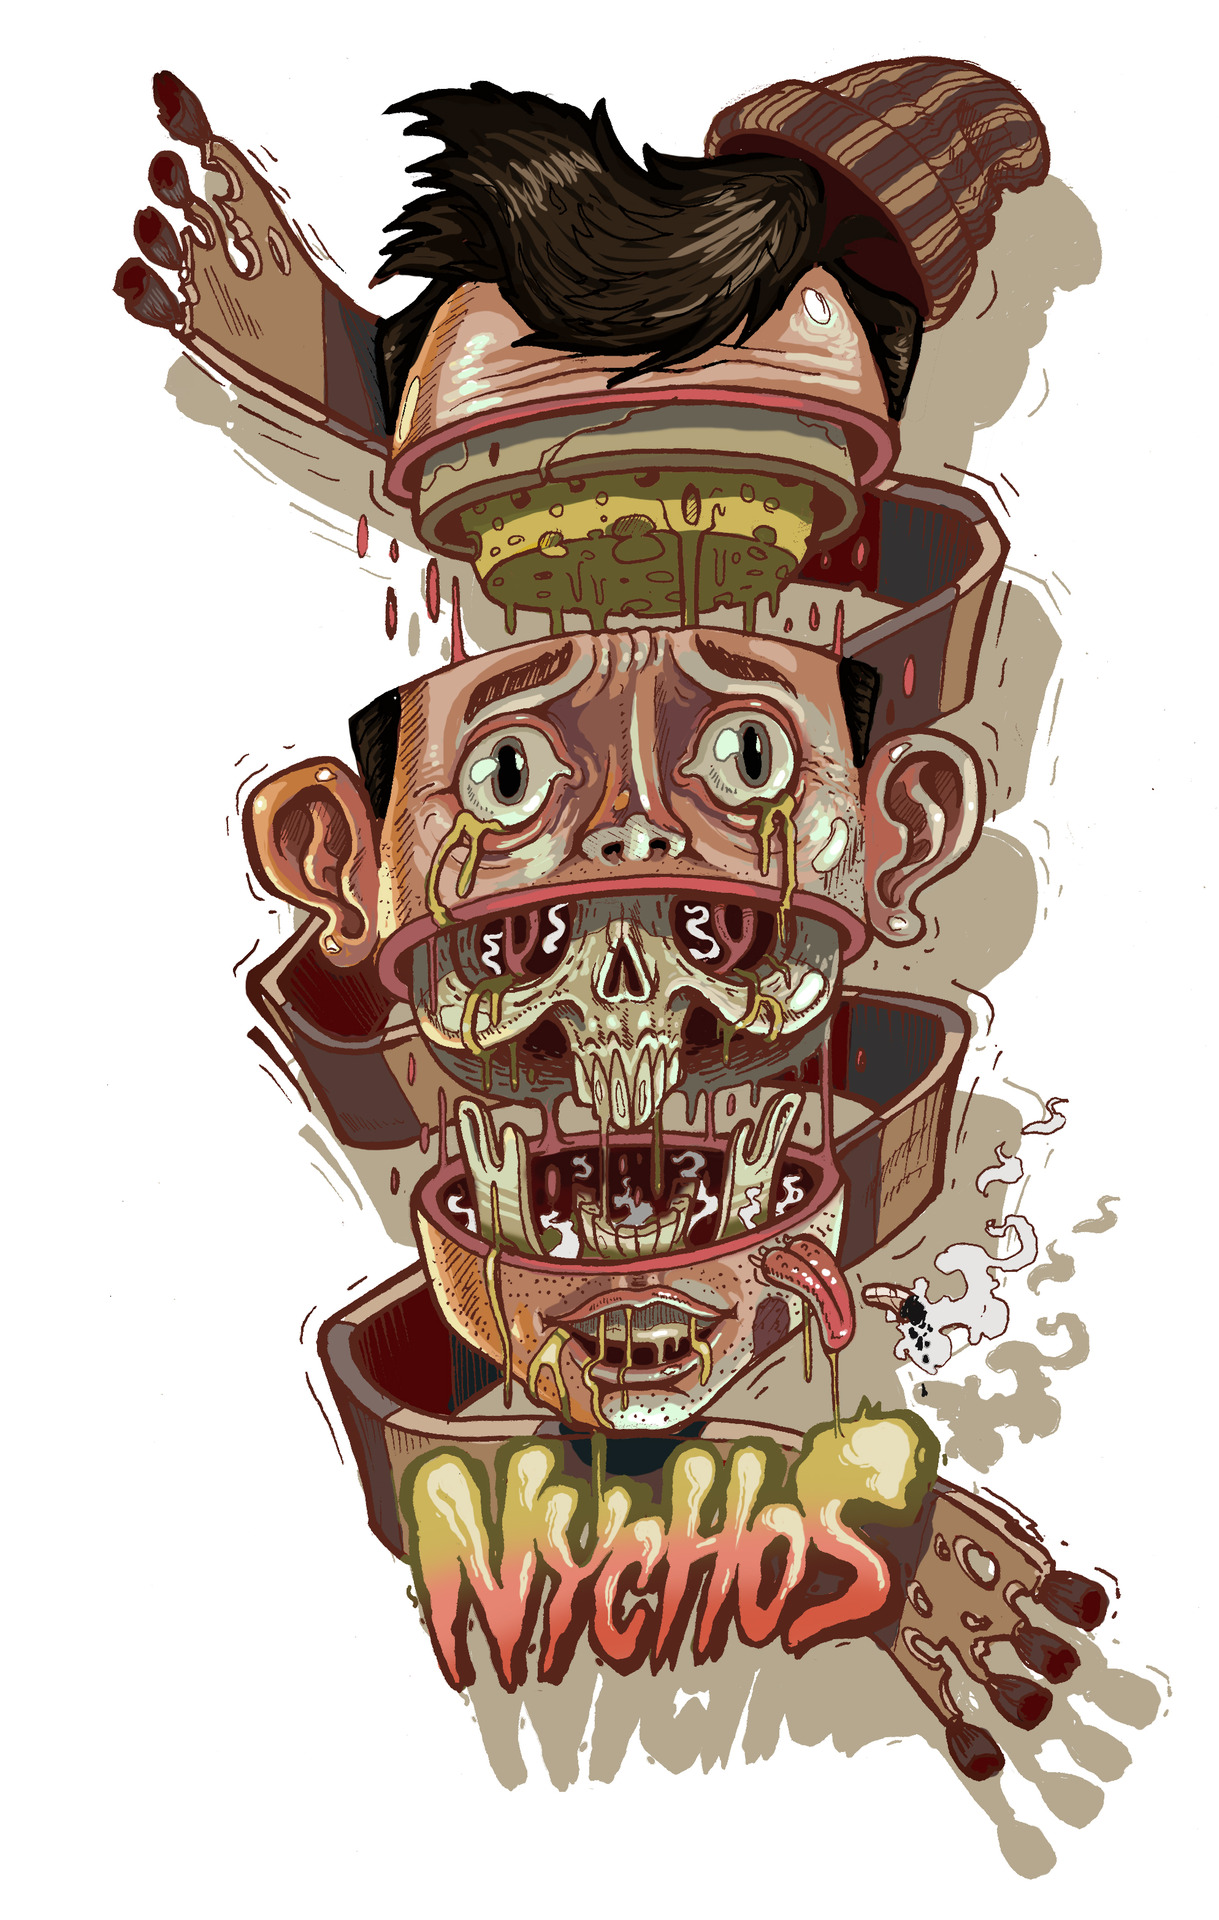 Translucent Temptention Mysterious Anatomy Artworks By Nychos